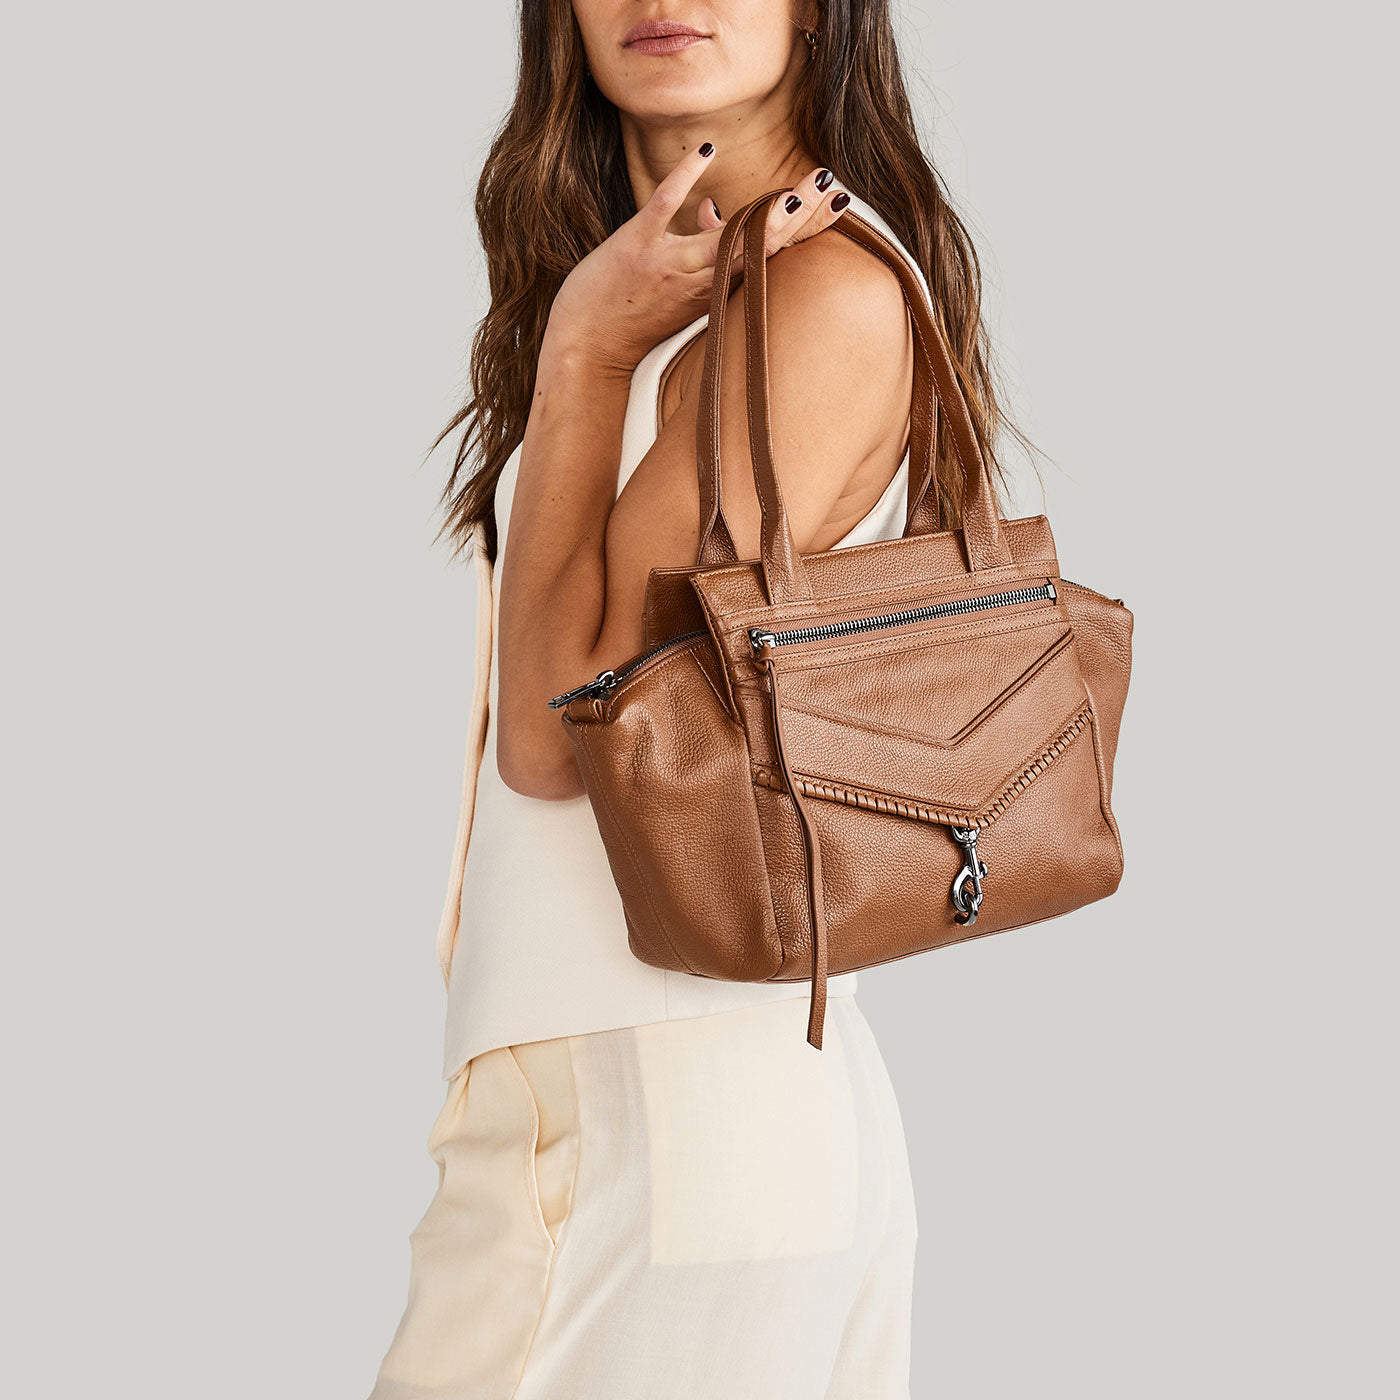 Botkier Cobble Hill Leather Cross Body Bag | Leather crossbody bag,  Crossbody bag, Bags